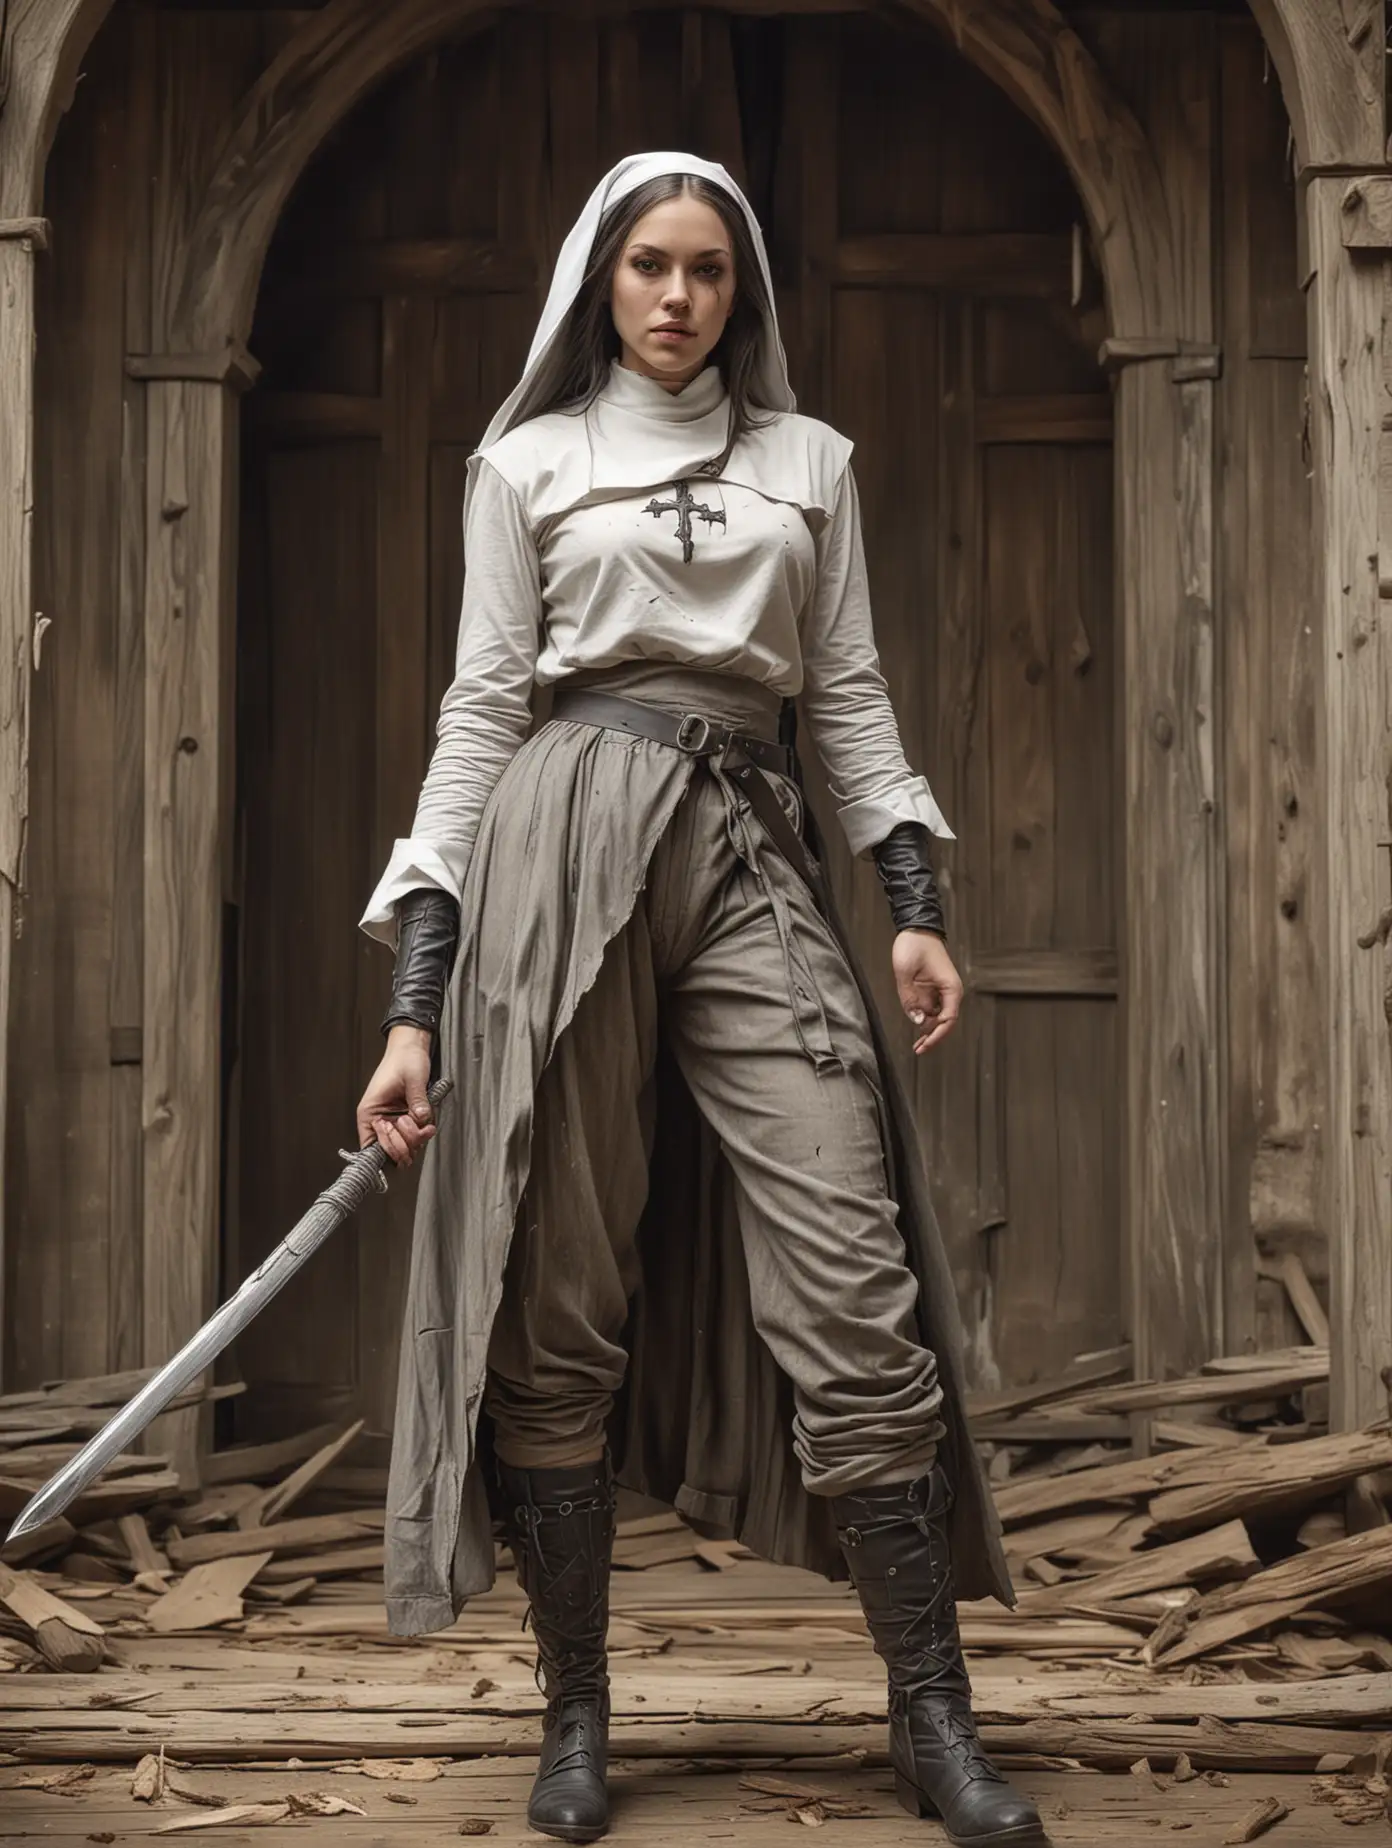 Dynamic-Action-Pose-of-American-Woman-Cosplaying-as-a-Nun-with-Sword